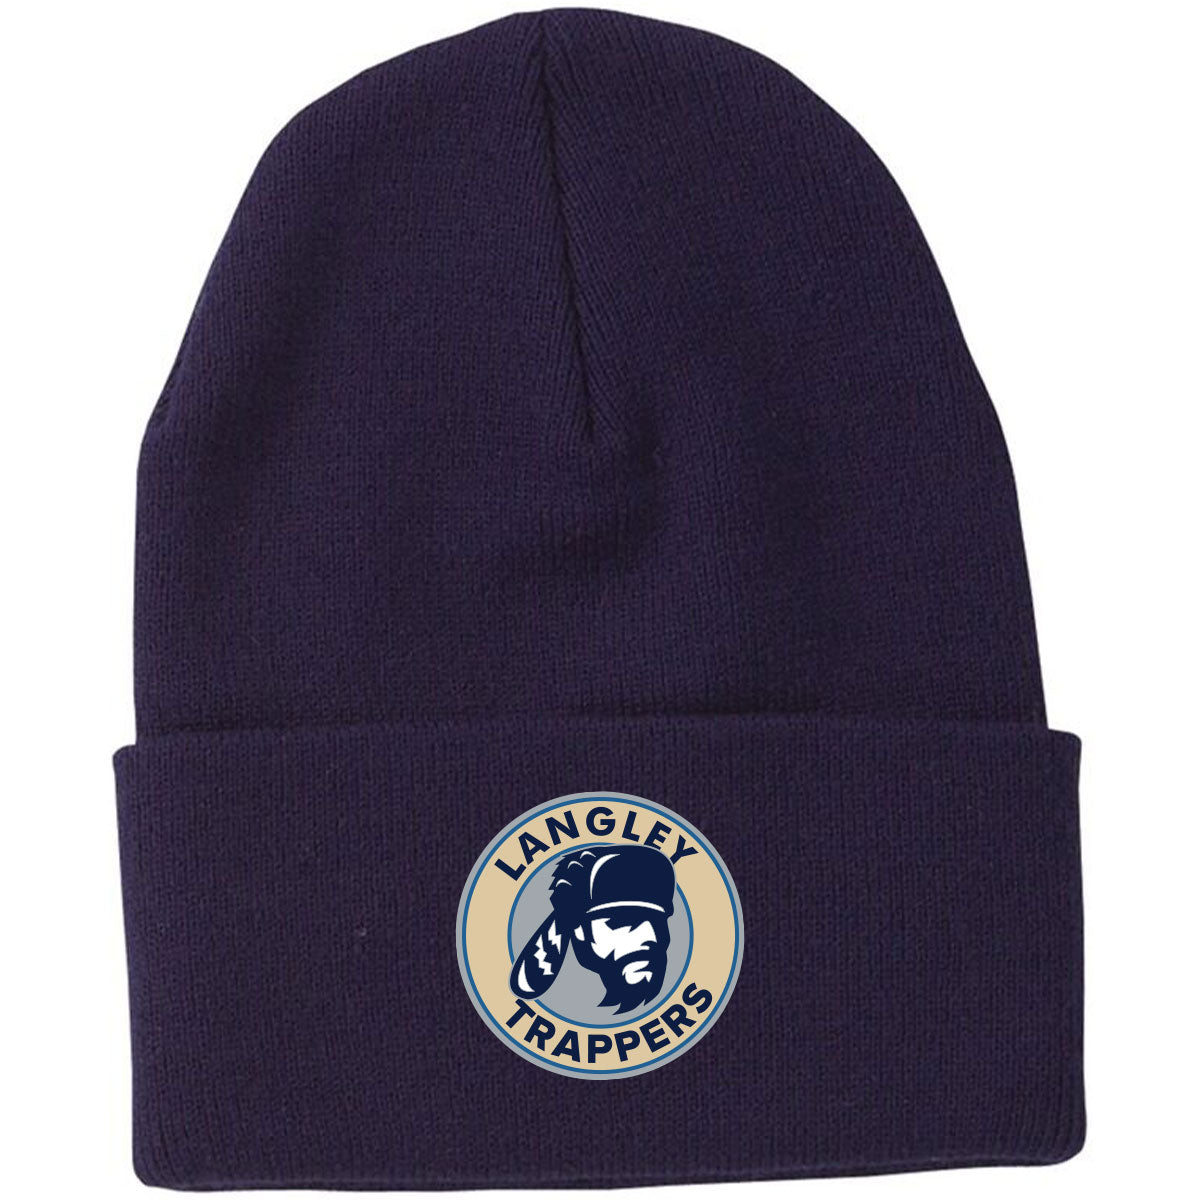 Langley Trappers -- Knit Cuffed Toque